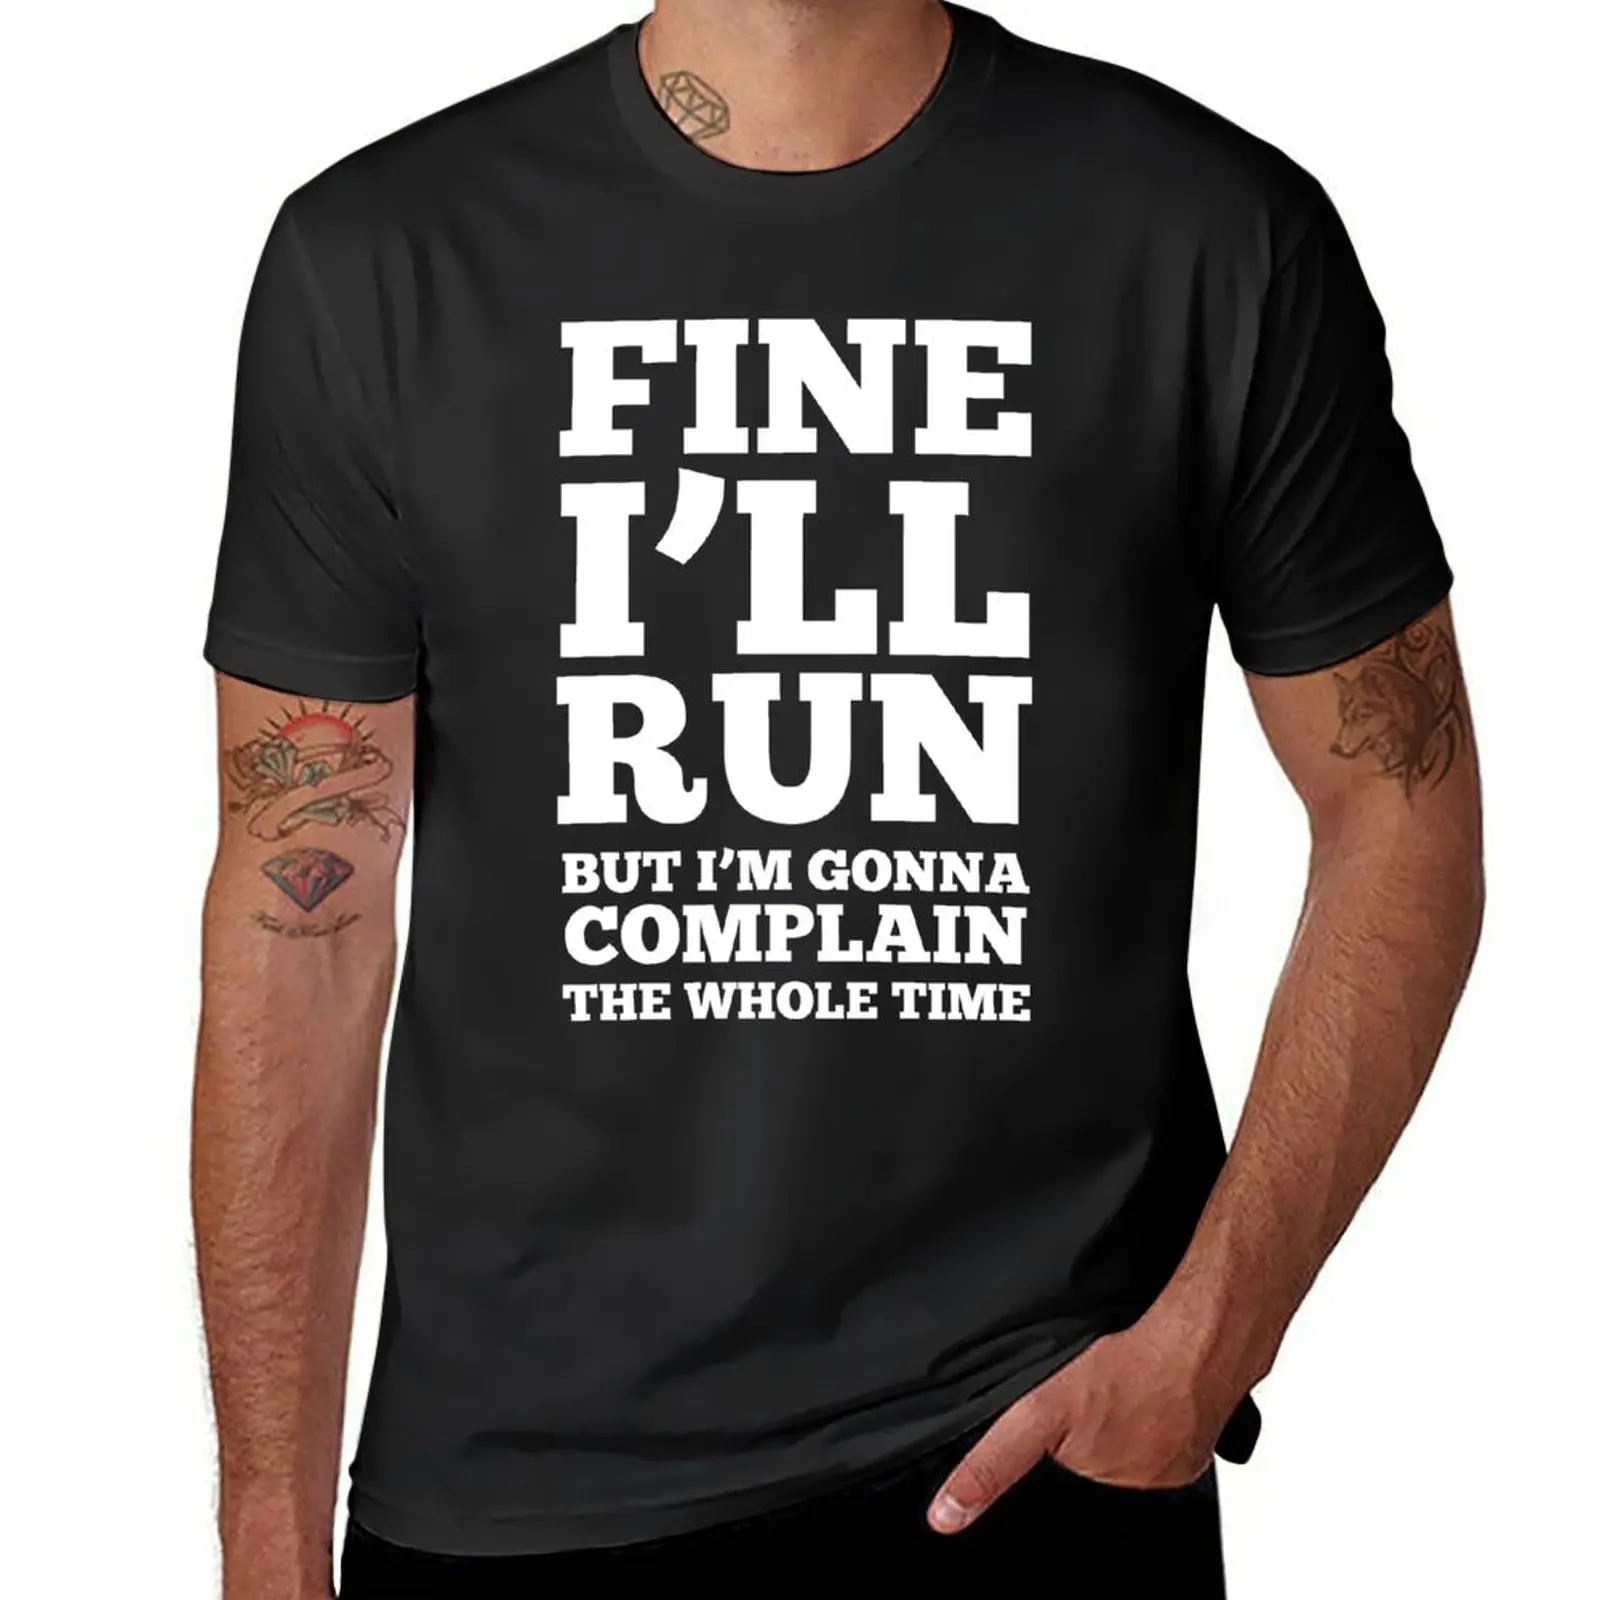 

New Fine i'll run but I'm gonna complain the whole time T-Shirt cute tops tops black t-shirts for men